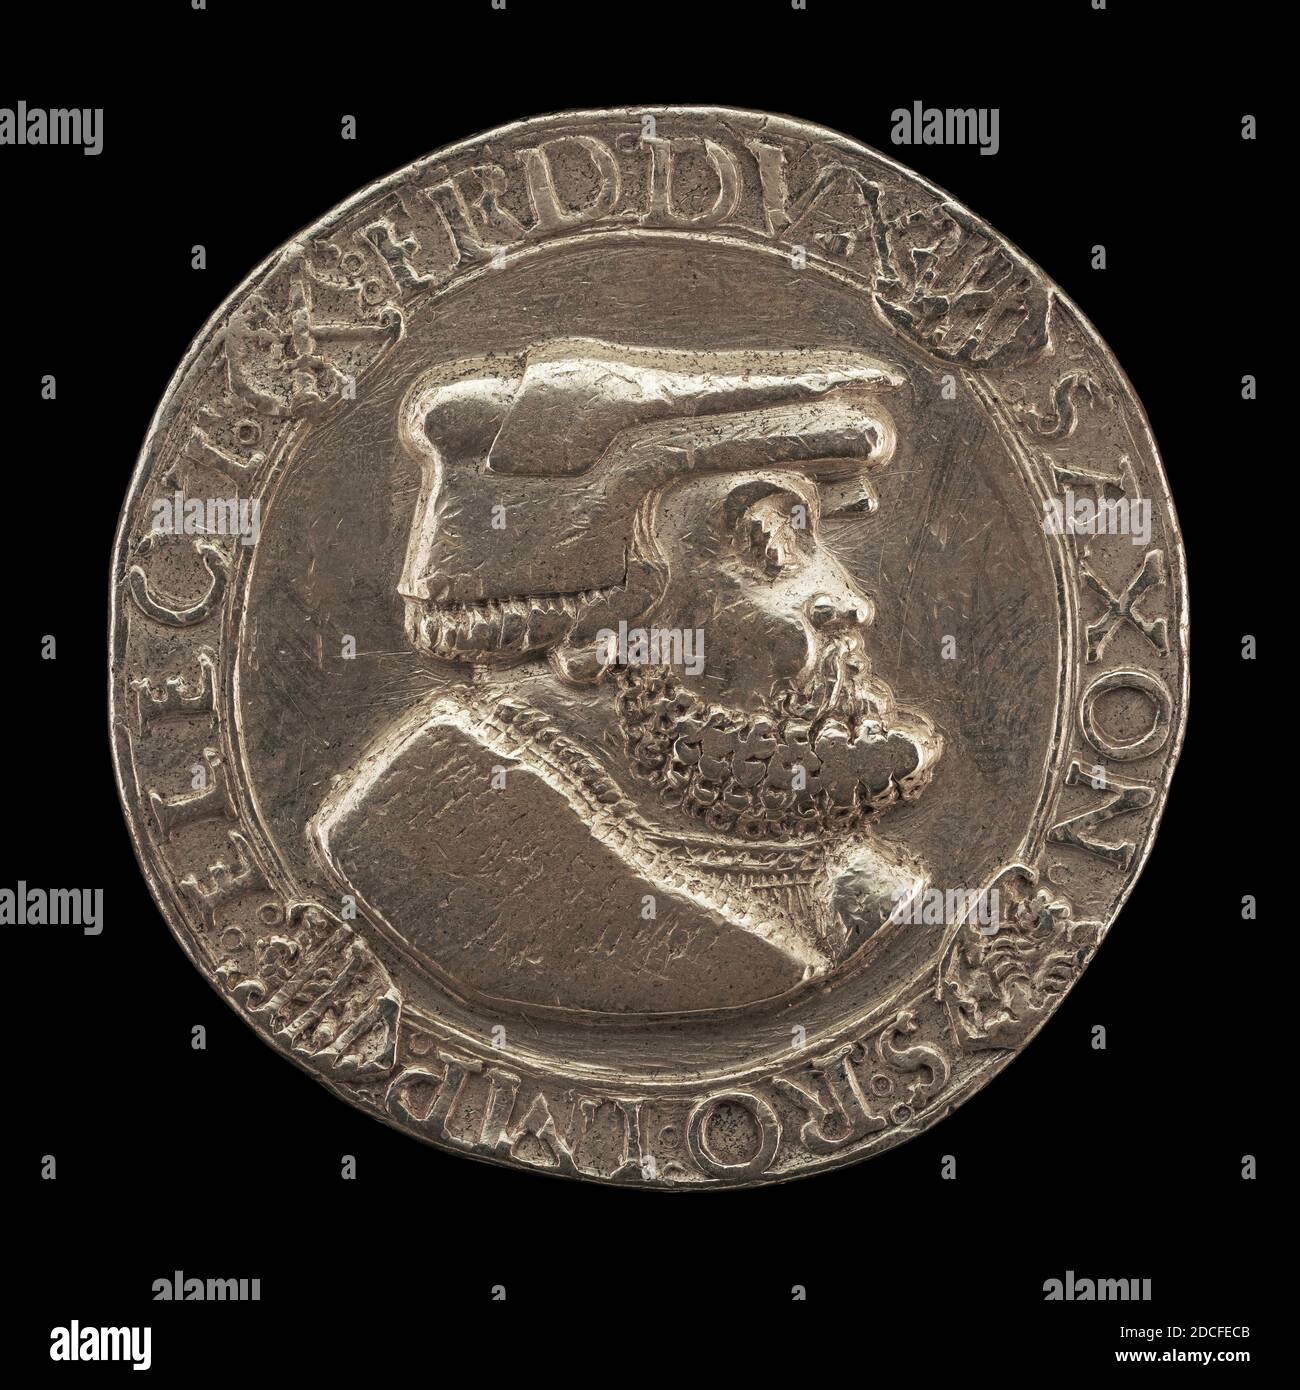 German 16th Century, (artist), Friedrich III the Wise, 1463-1525, Duke and Elector of Saxony 1486, 1522, silver/Struck, overall (diameter): 4.29 cm (1 11/16 in.), gross weight: 25.96 gr (0.057 lb.), axis:3:00 Stock Photo